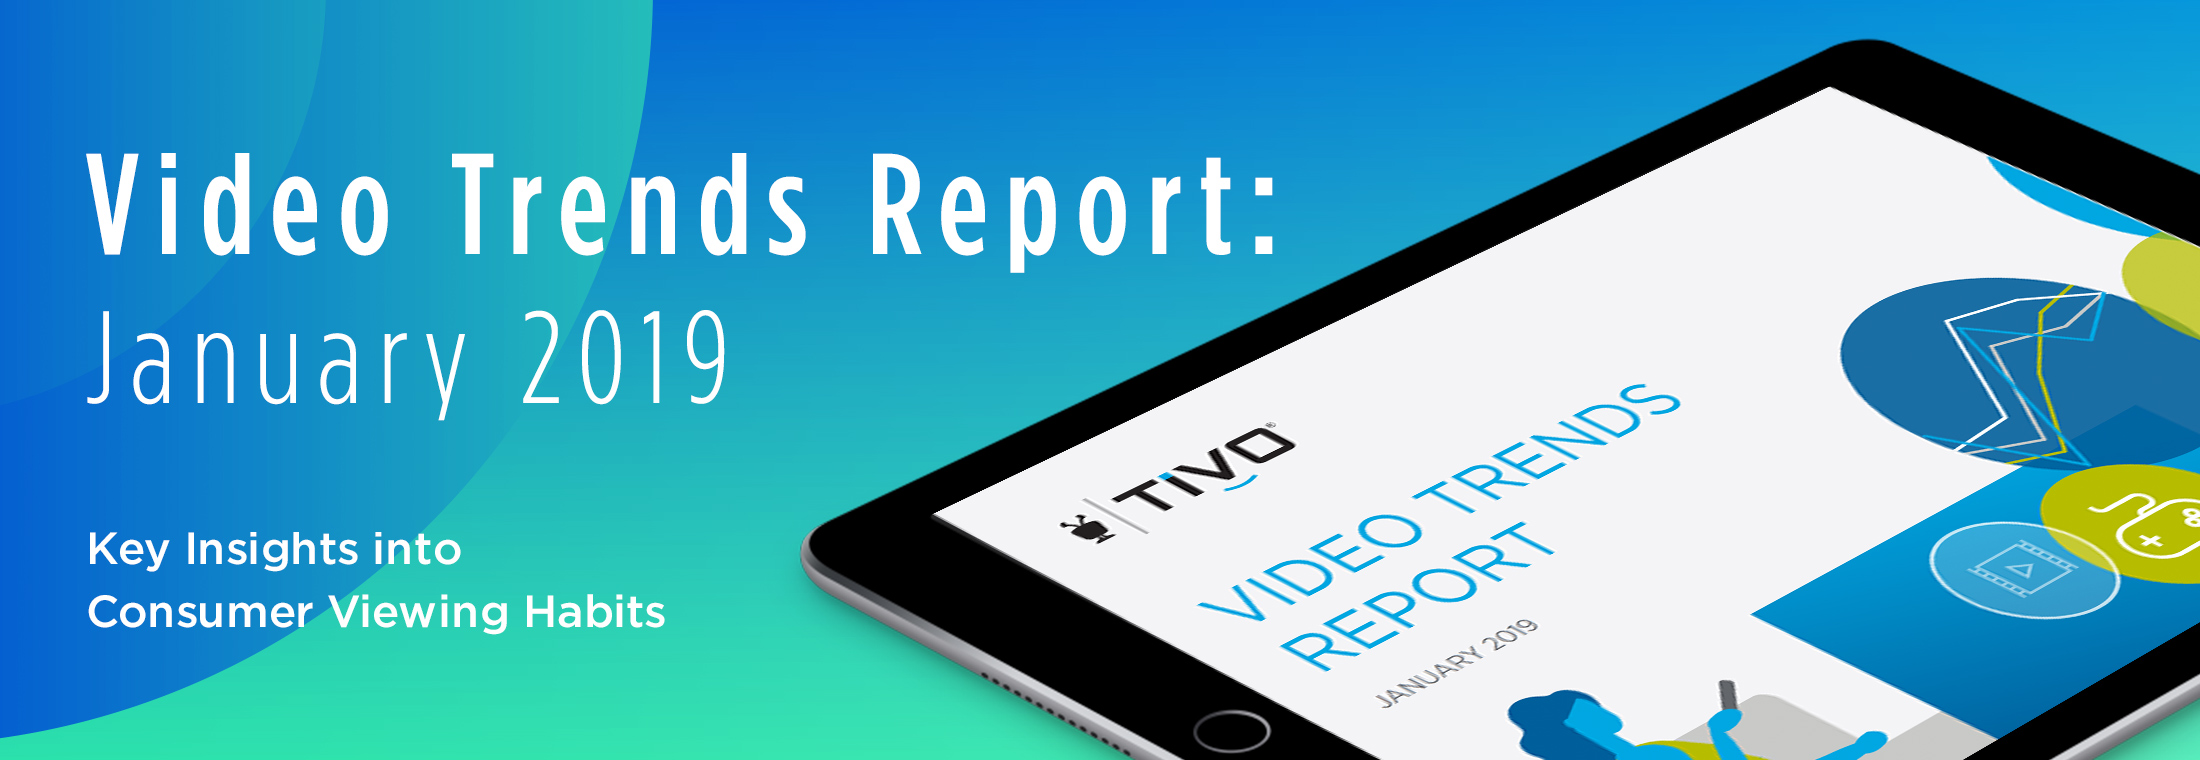 Video Trends Research From TiVo